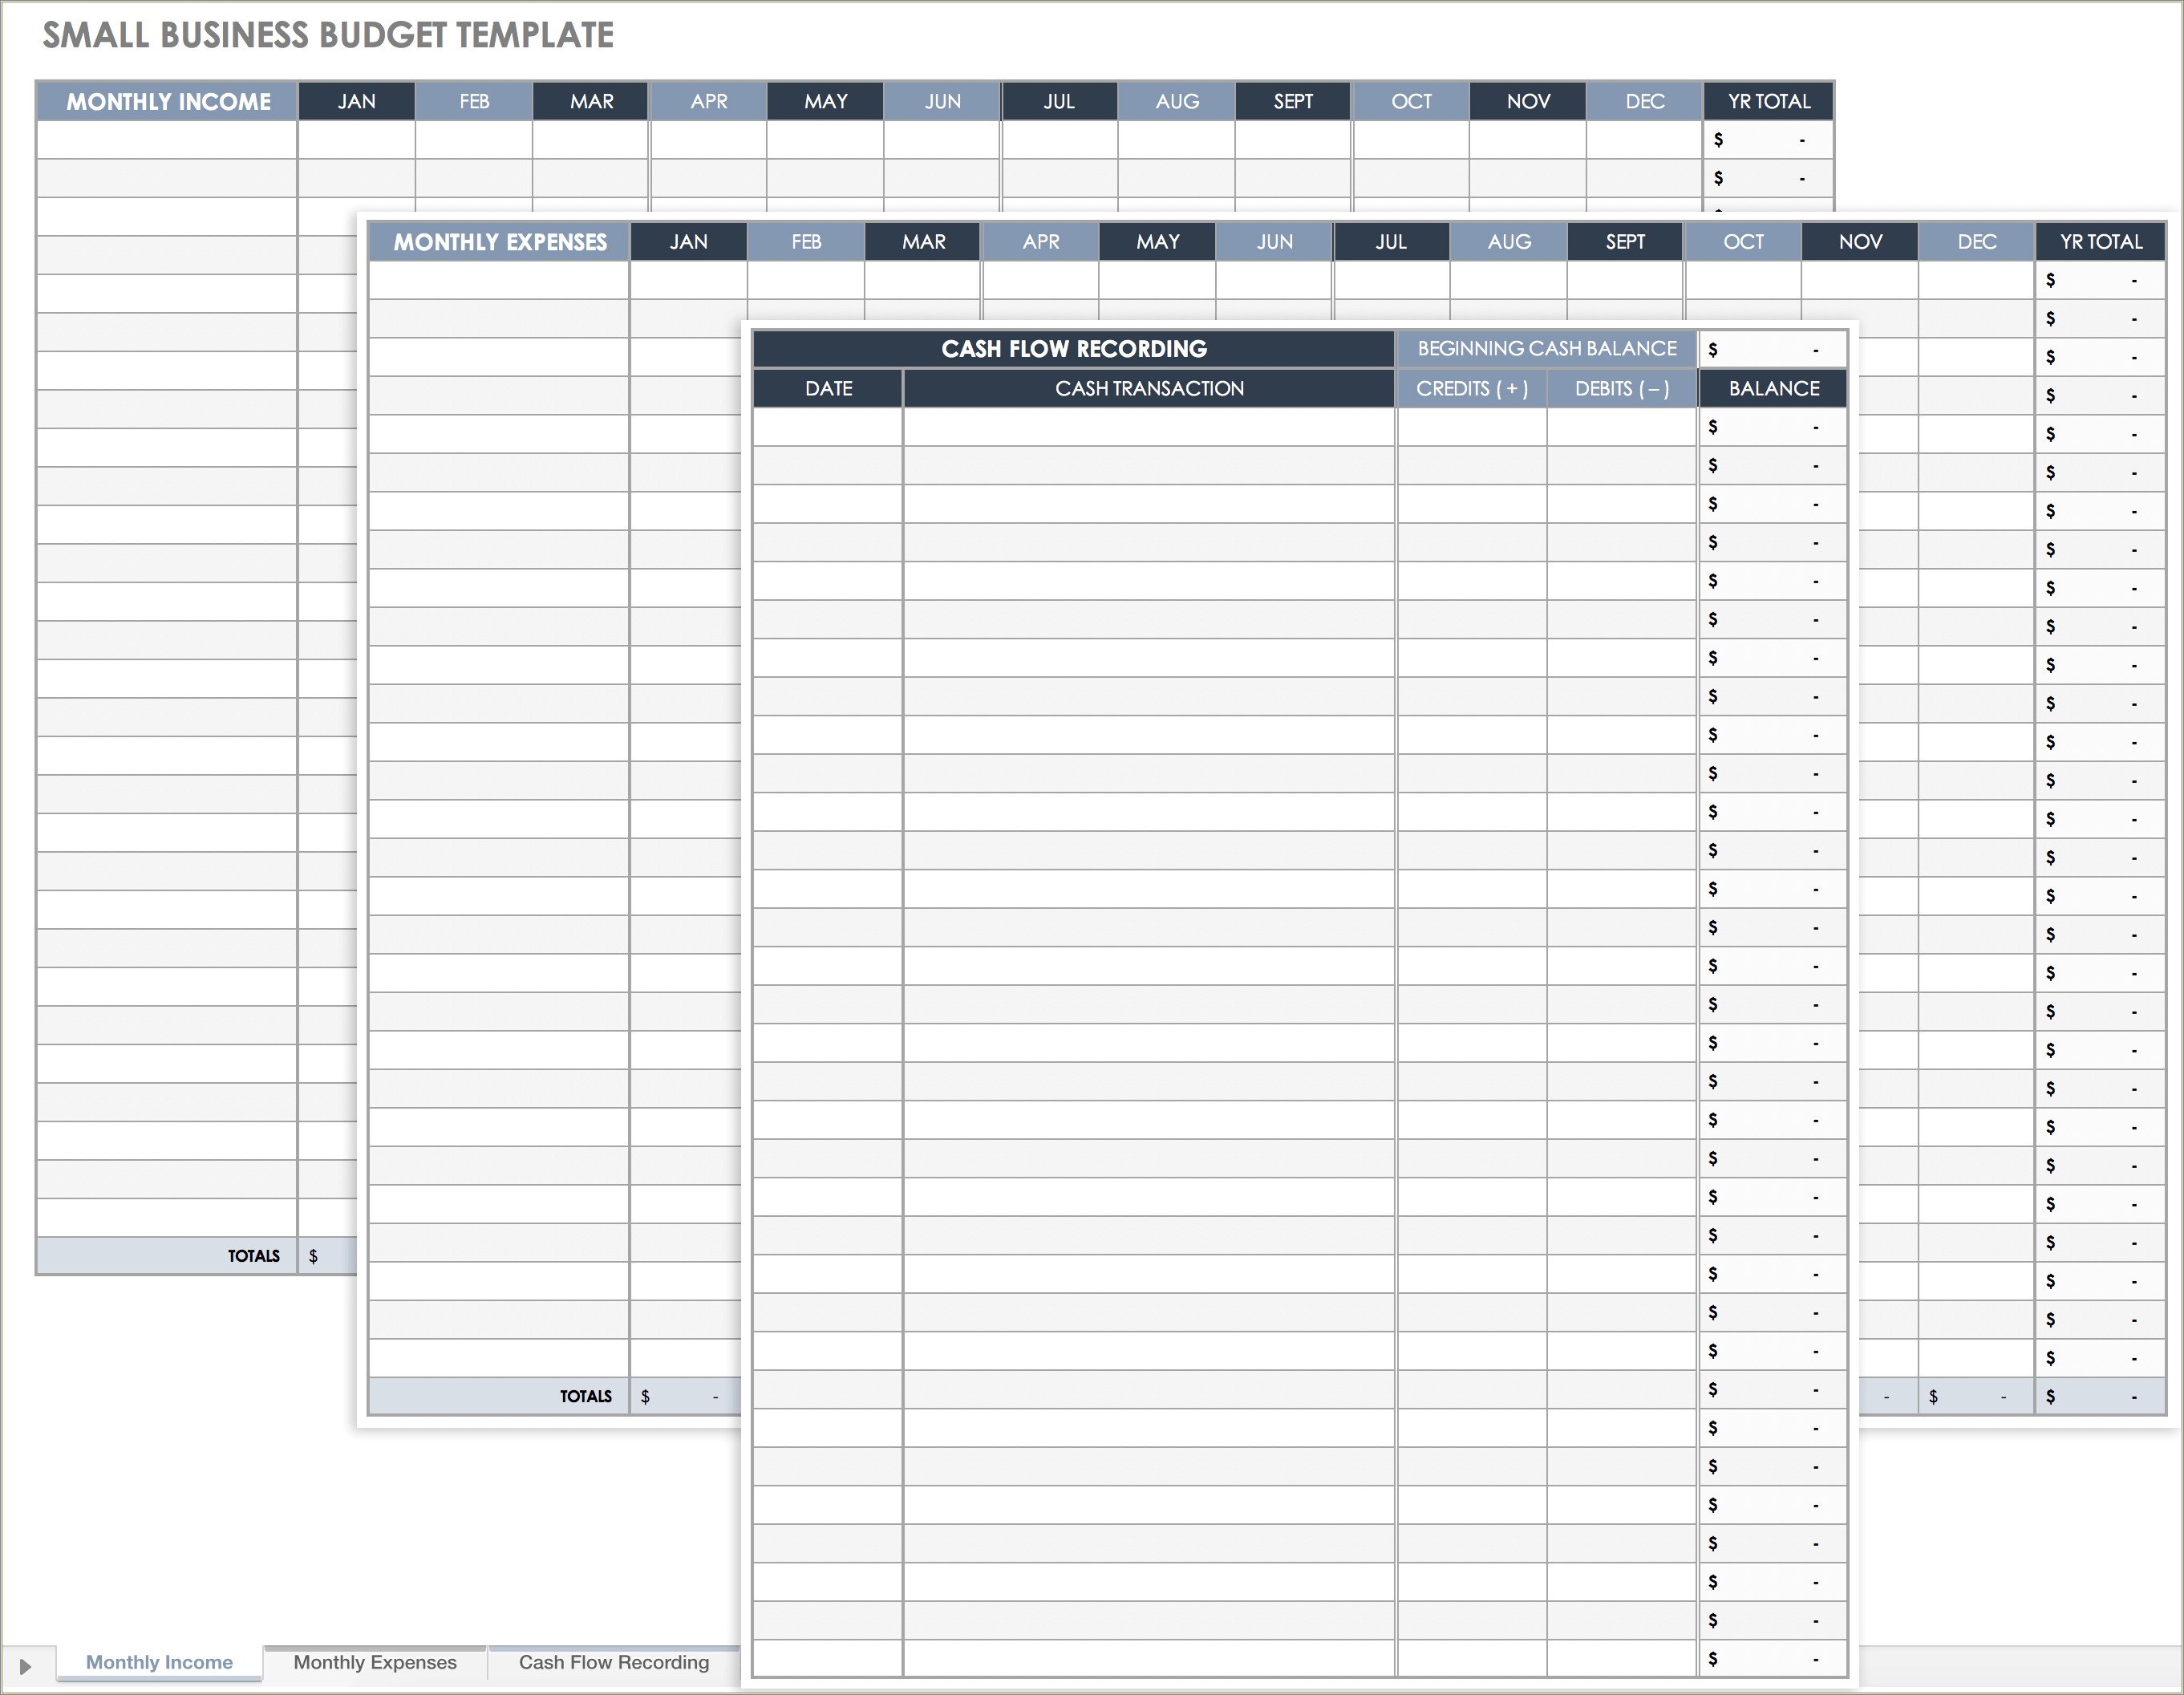 Annual Budget Template For Small Business Free